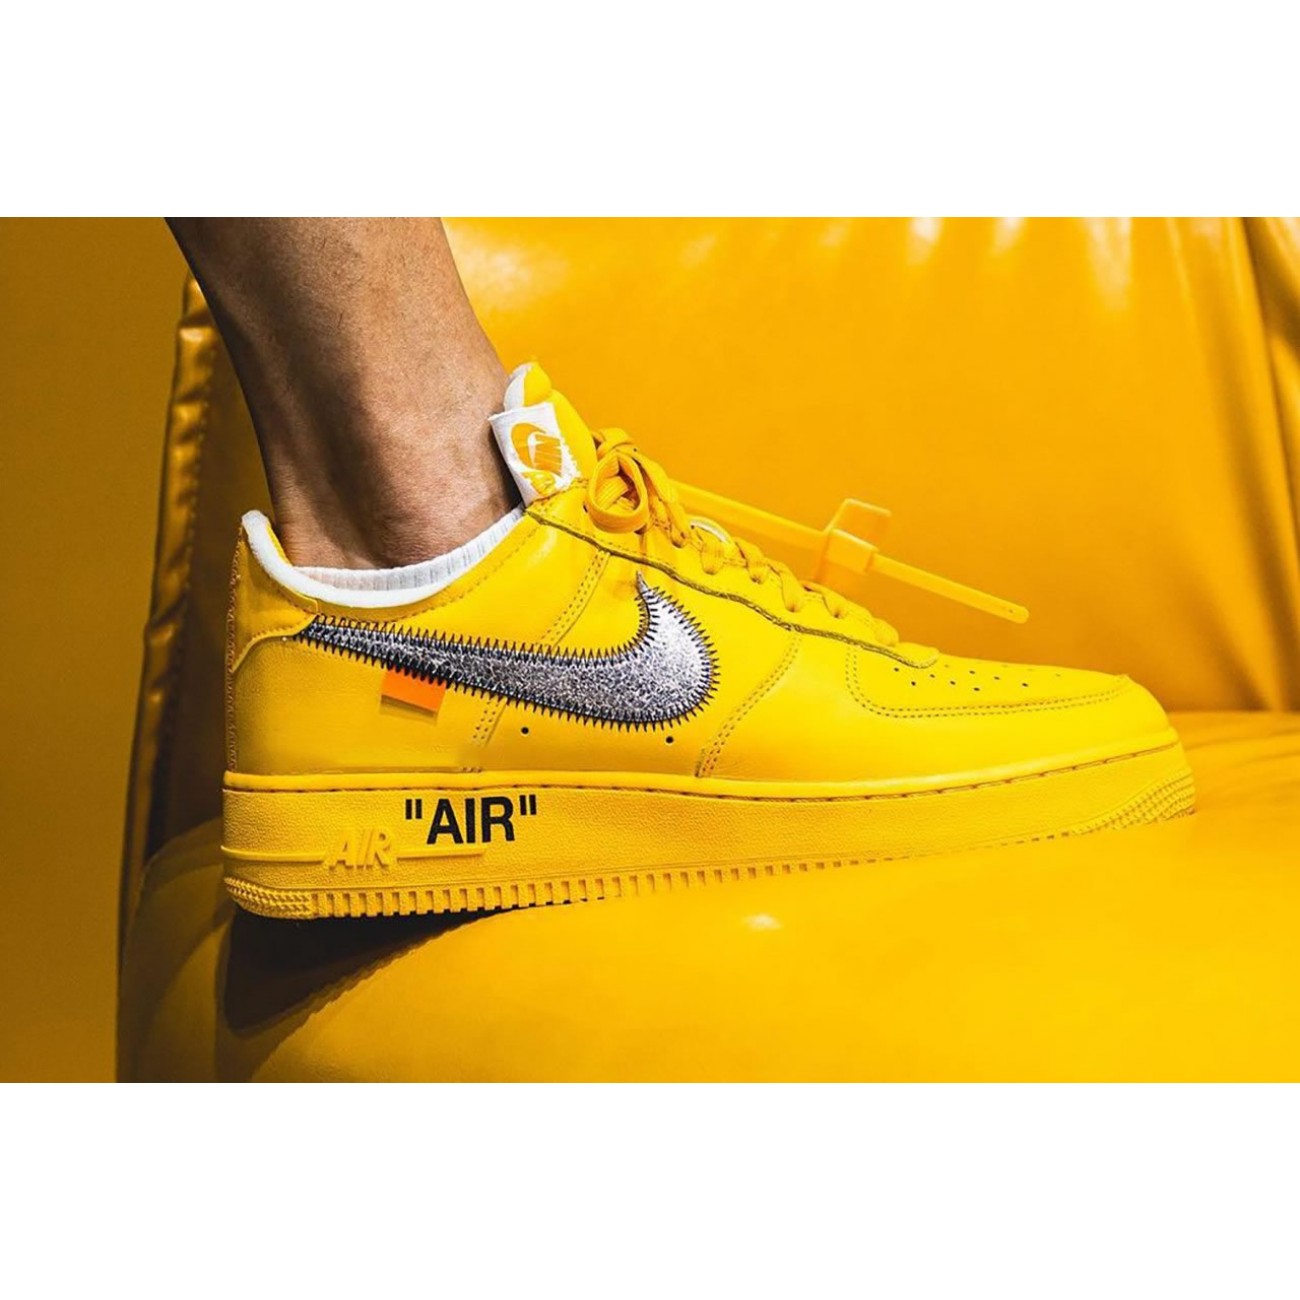 Off-White x Nike Air Force 1 "University Gold" DD1876-700